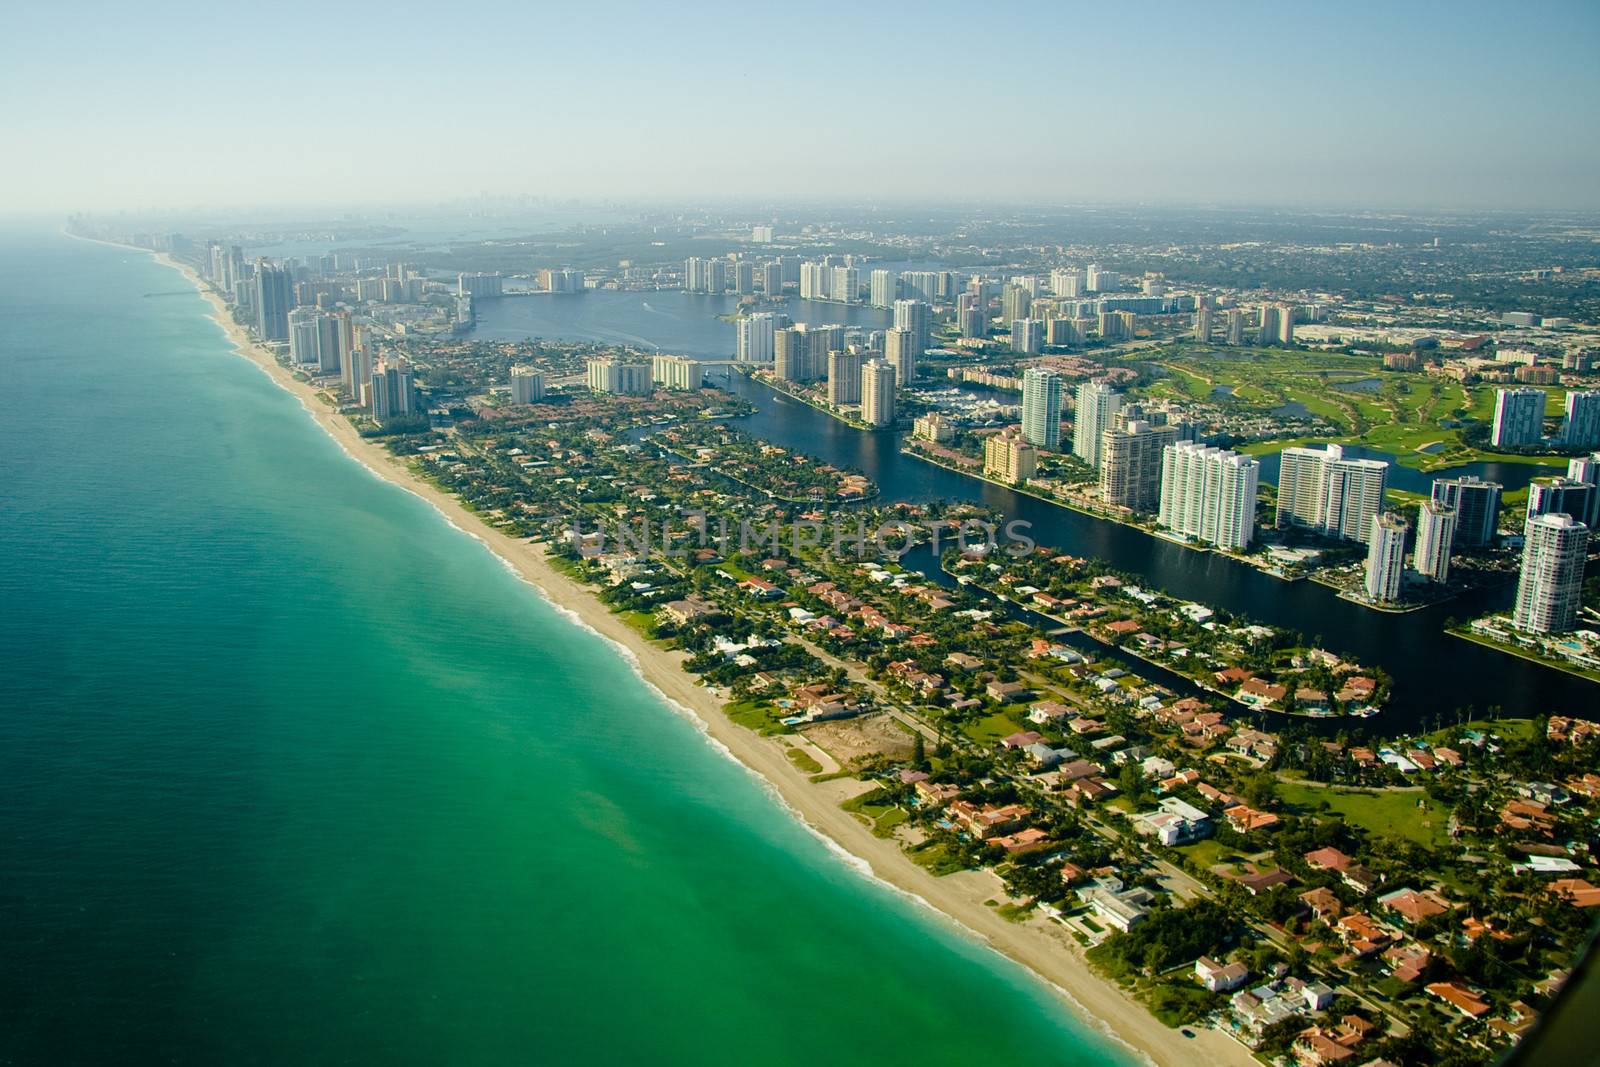 Aerial view of seashore in Miami by CelsoDiniz